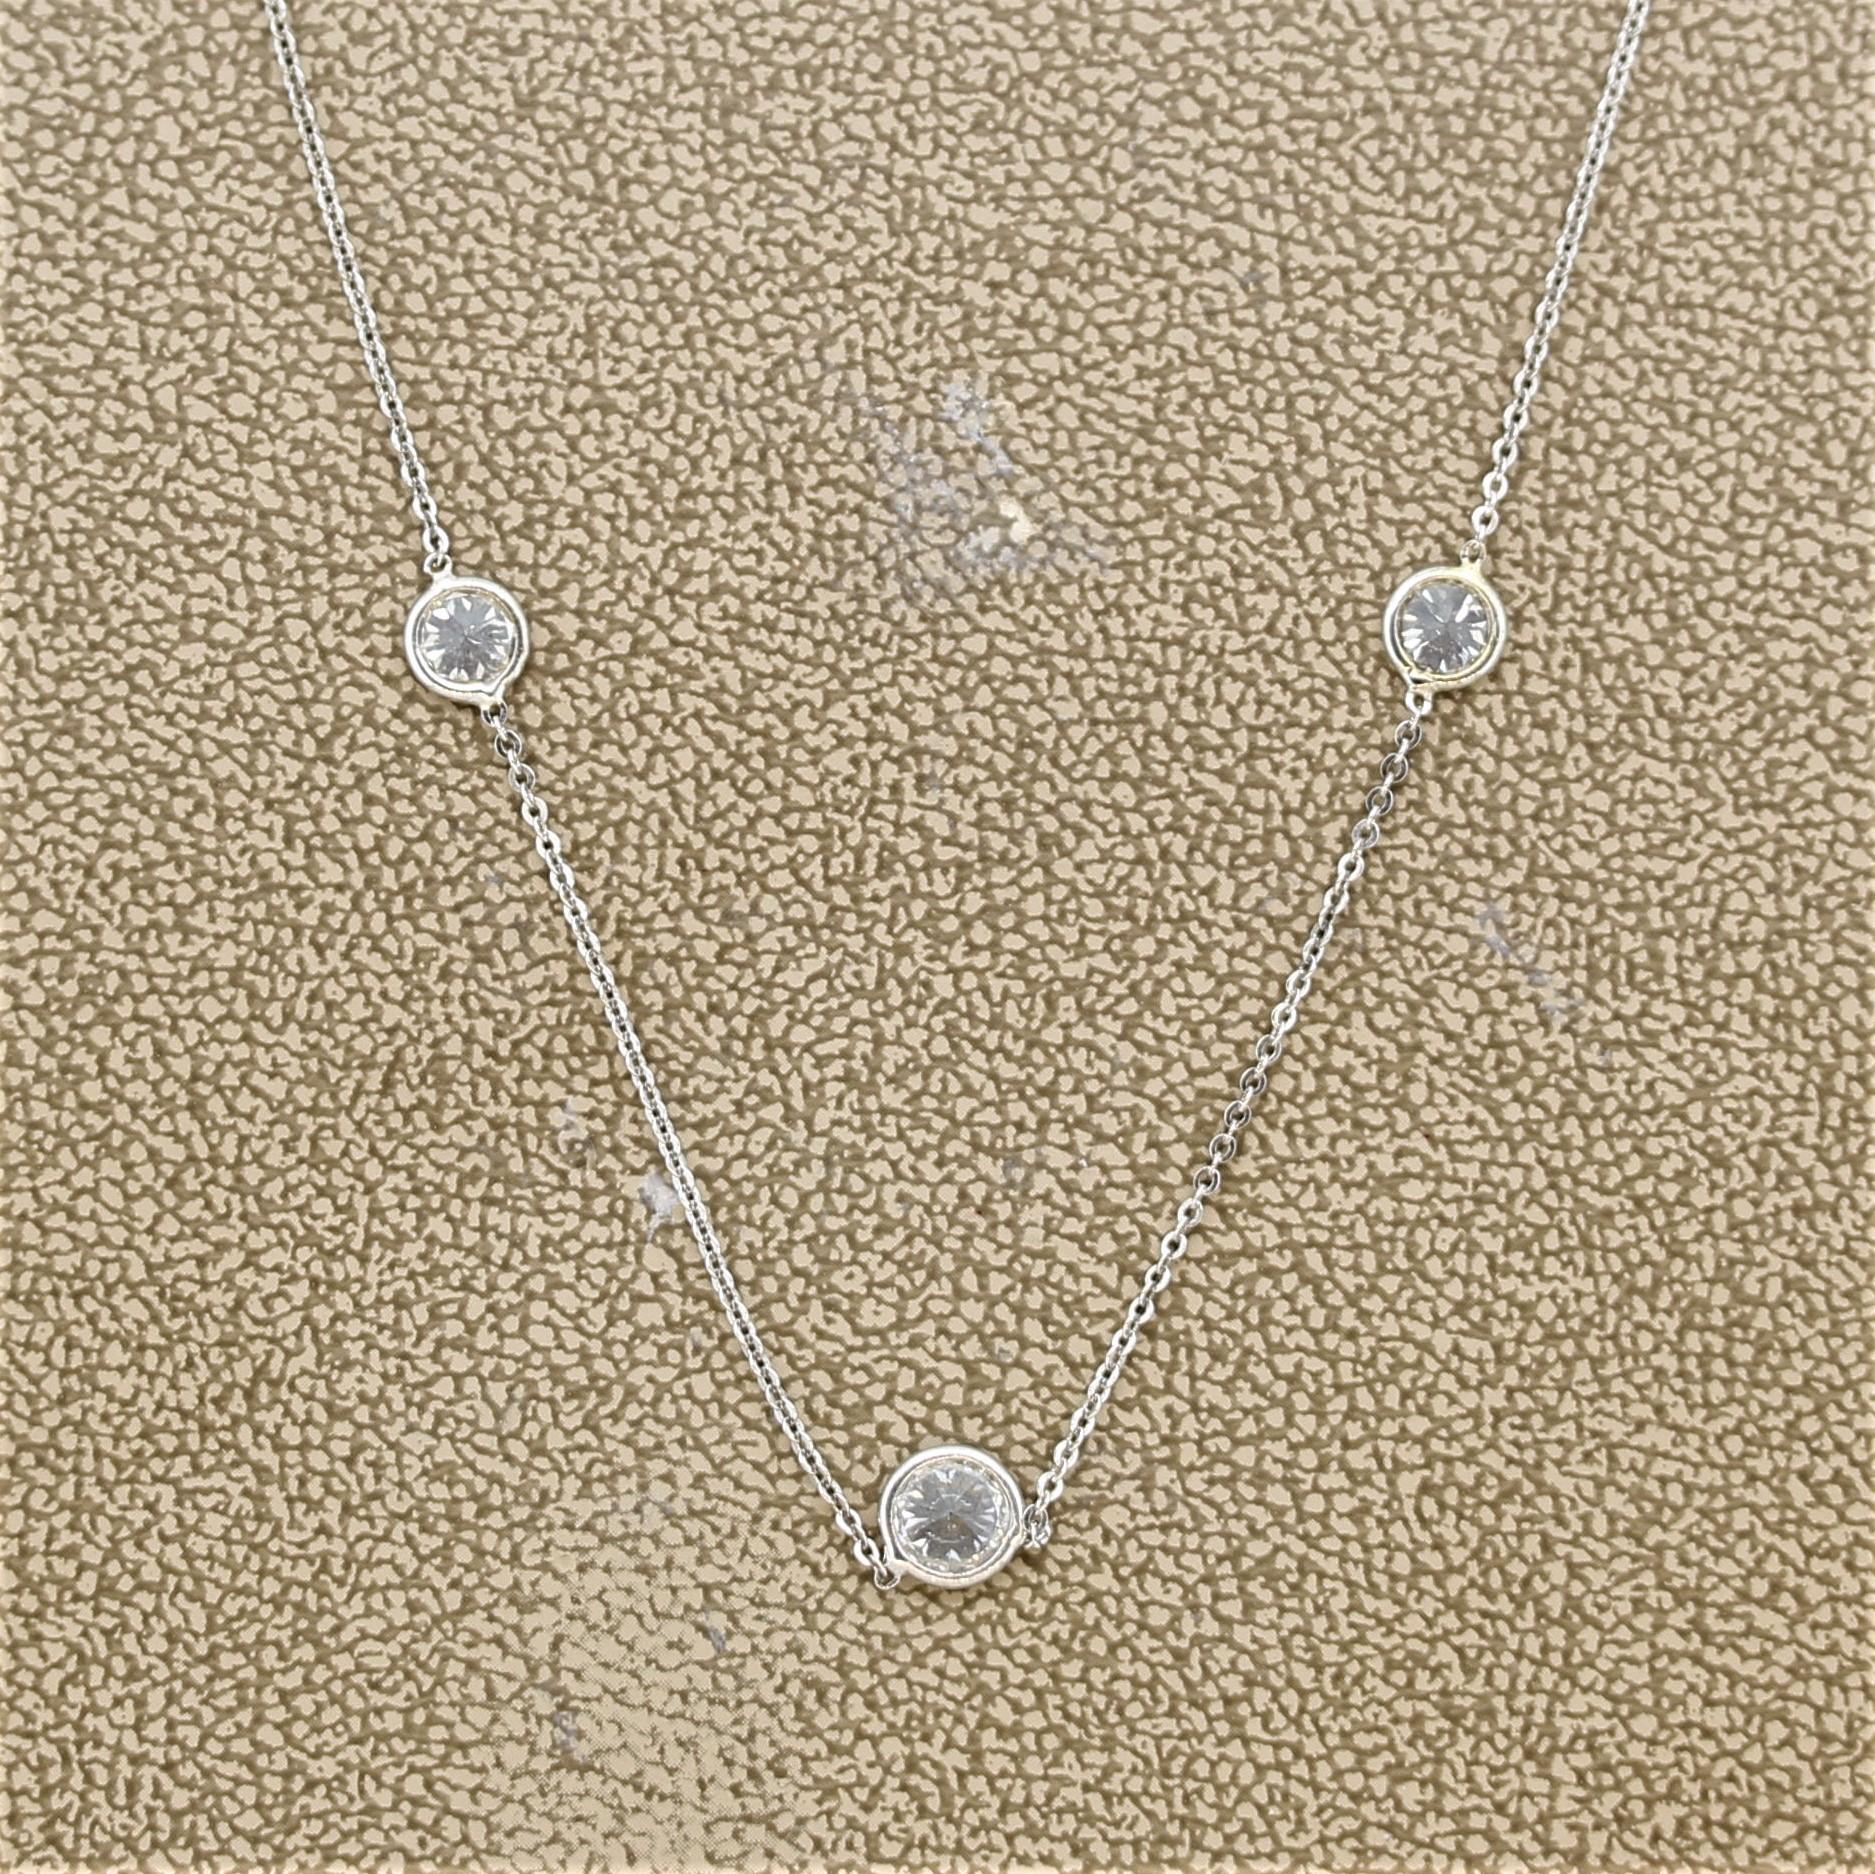 A simple yet elegant necklace featuring 3 round brilliant cut diamonds. The diamond in the center is larger than the two on its sides and together they weigh 1.00 carat. They are bezel set in 18k white gold and set 2-inches apart. Made in 18k white